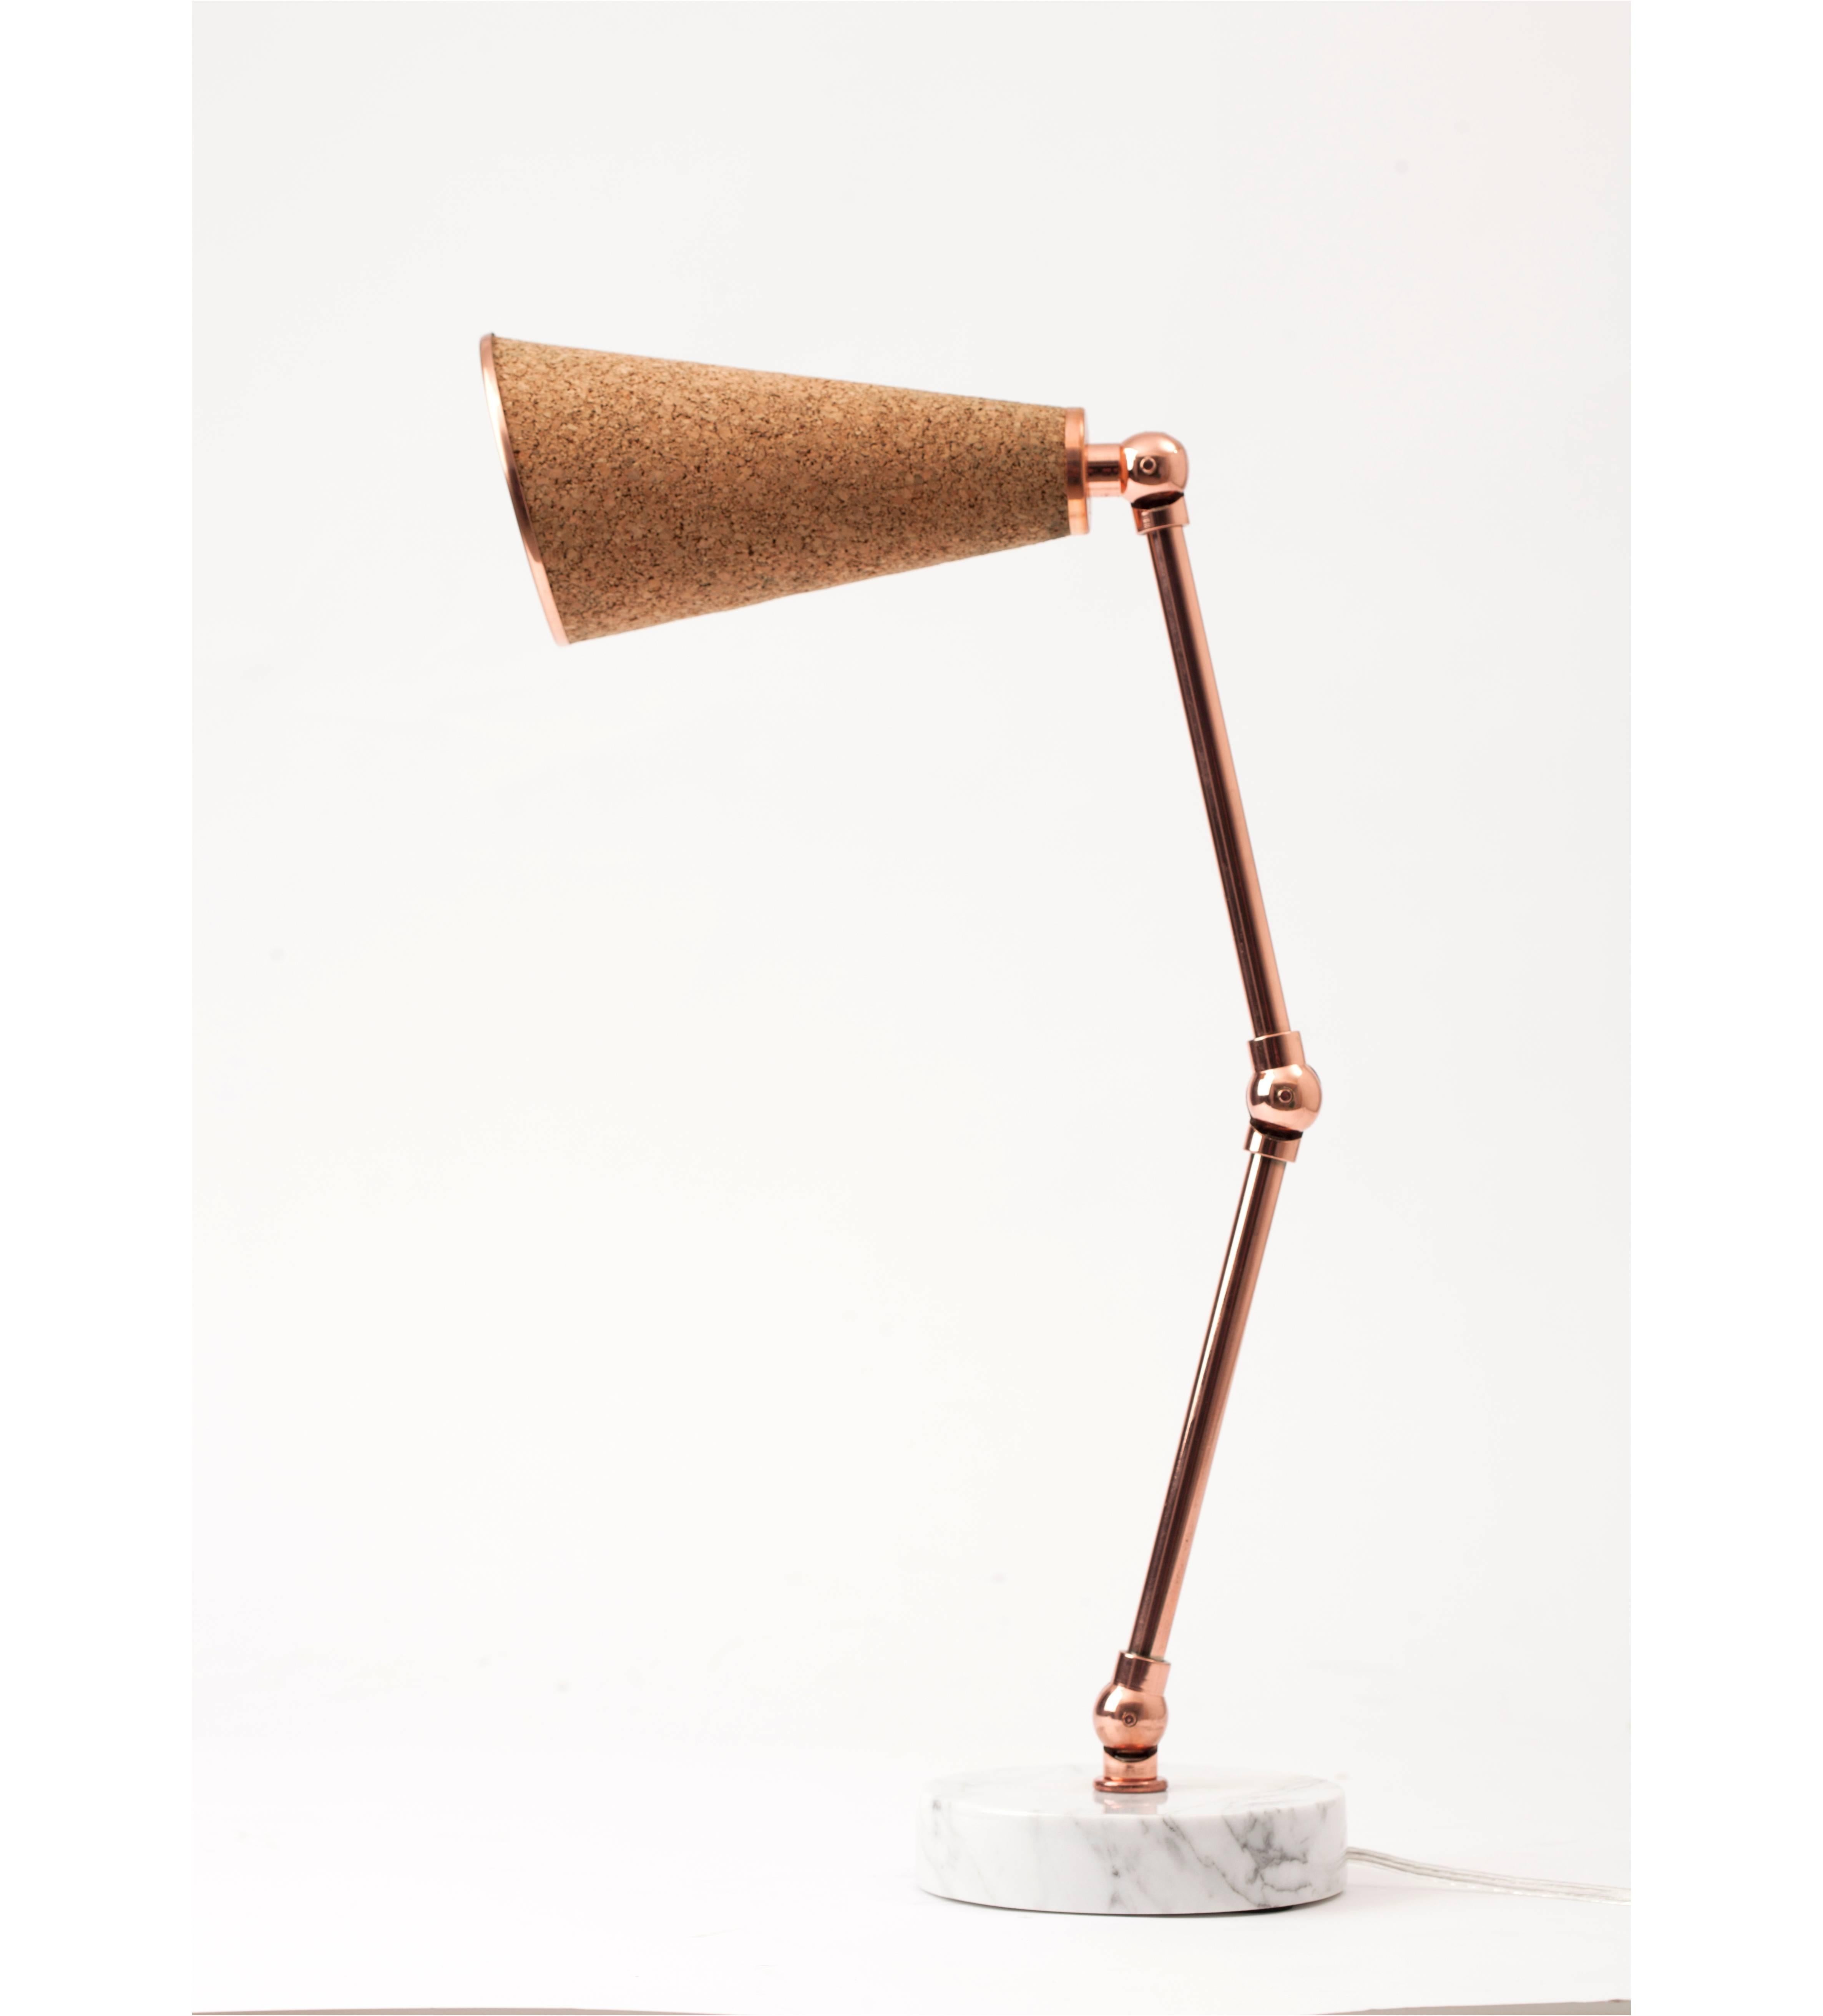 The uniquely designed Lanterna Lamp by NY-based designer Merve Kahraman is a new age robot desk lamp or table lamp with a heart.

Unique textured materials such as felt, cork and cowhide are combined with white and black colored marbles and shiny